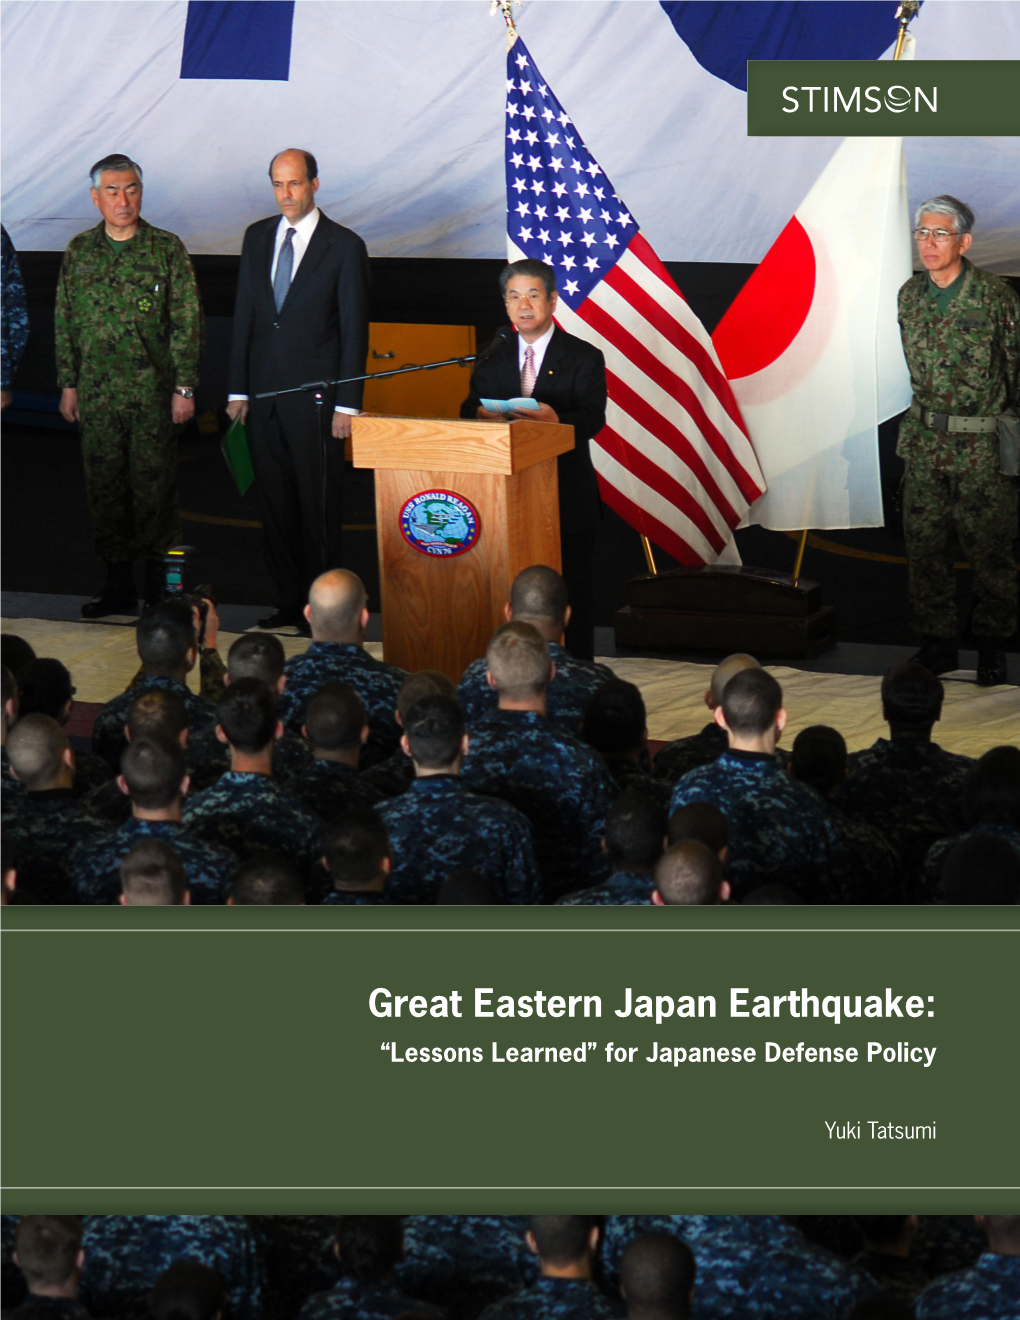 Great Eastern Japan Earthquake: “Lessons Learned” for Japanese Defense Policy